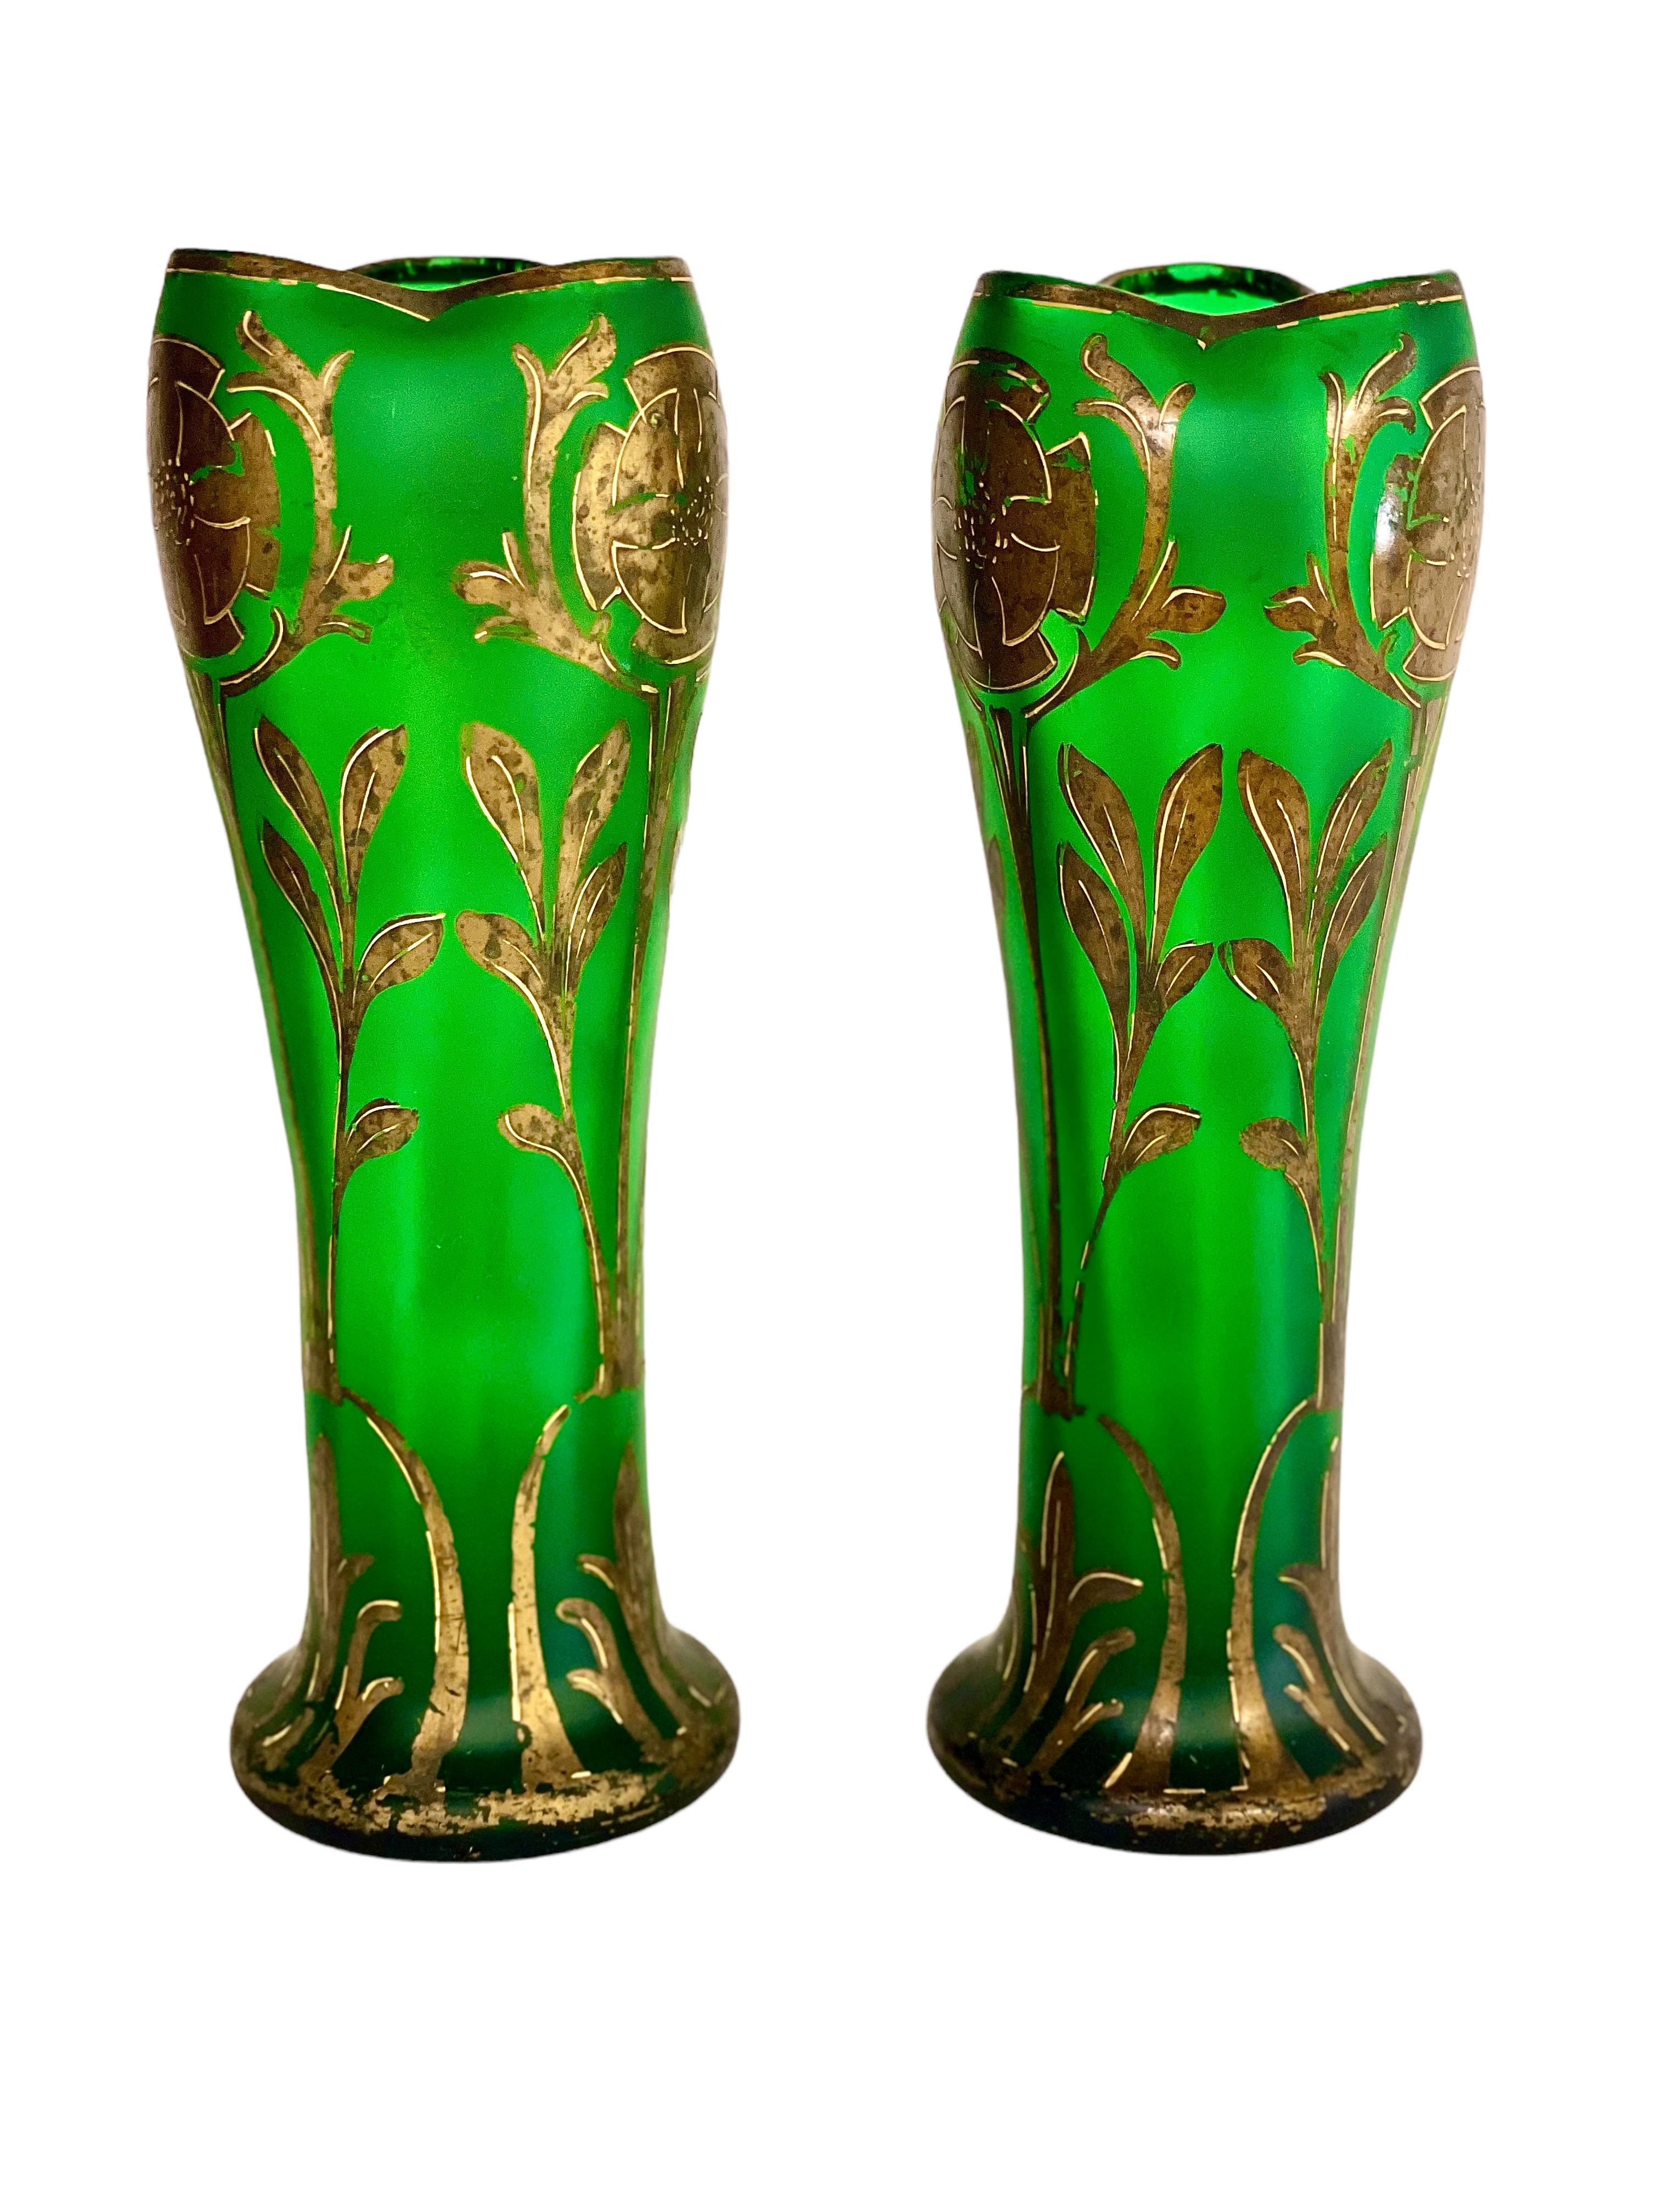 An unusual pair of Art Nouveau period hand-painted green glass vases, with undulating gilded rim and flared base. These elegant, floral-decorated vases date from around 1880-1900, and come into their own when bathed in sunlight in a bright room.